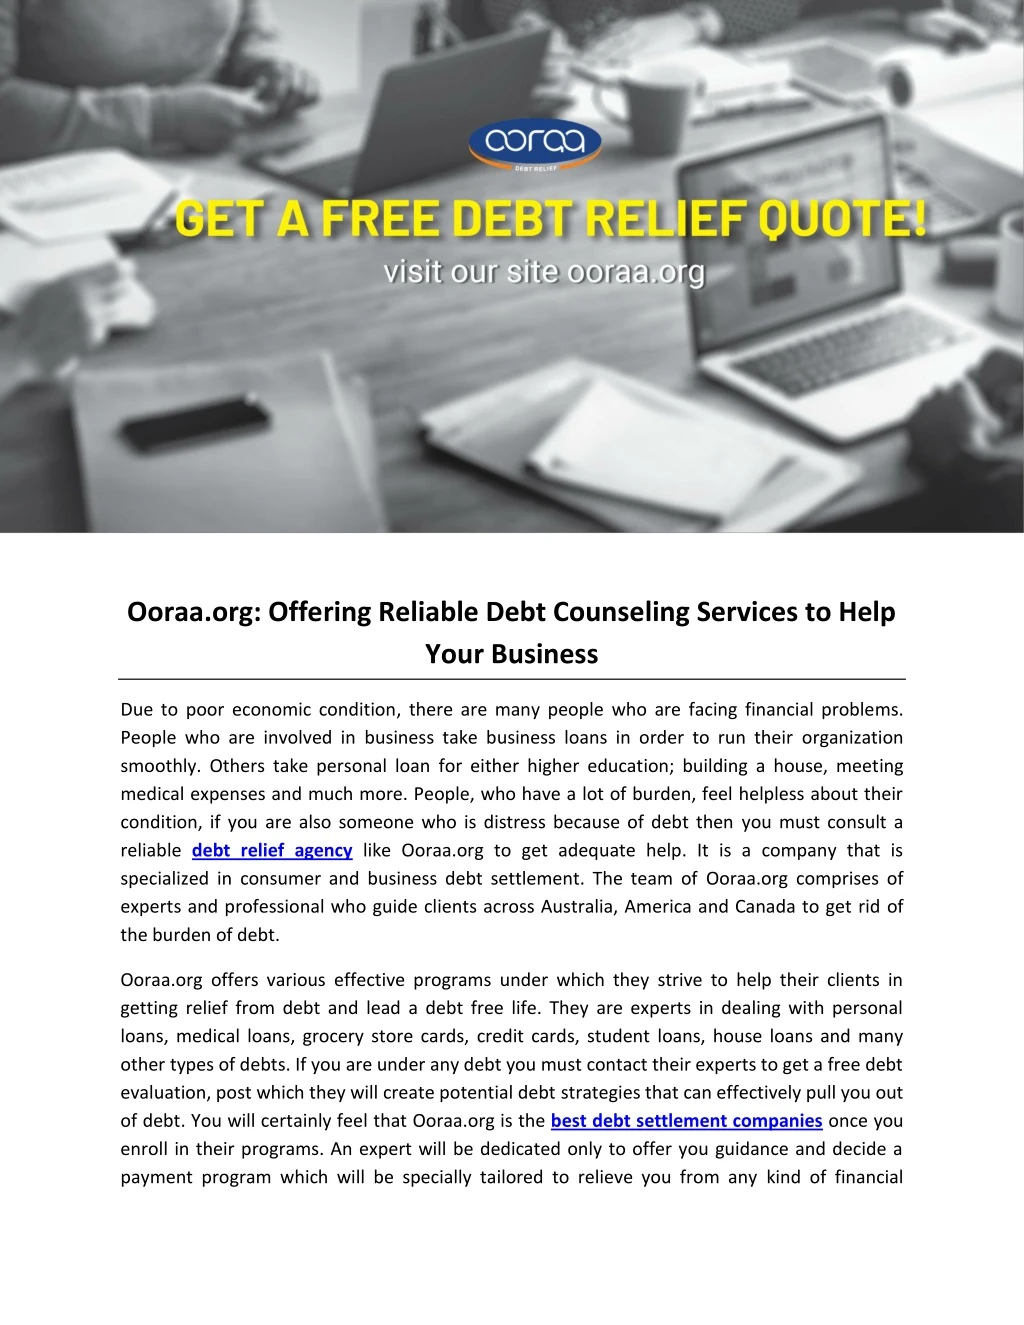 ooraa org offering reliable debt counseling